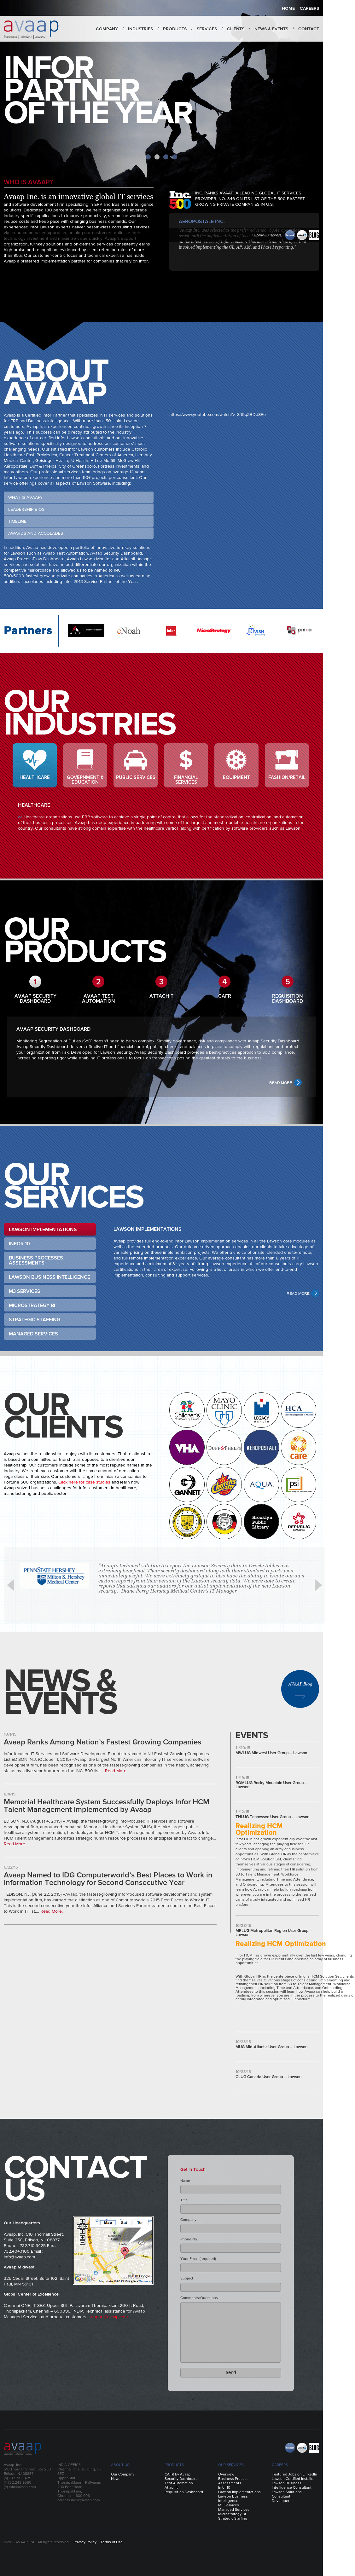 Avaap Logo - Avaap Competitors, Revenue and Employees - Owler Company Profile